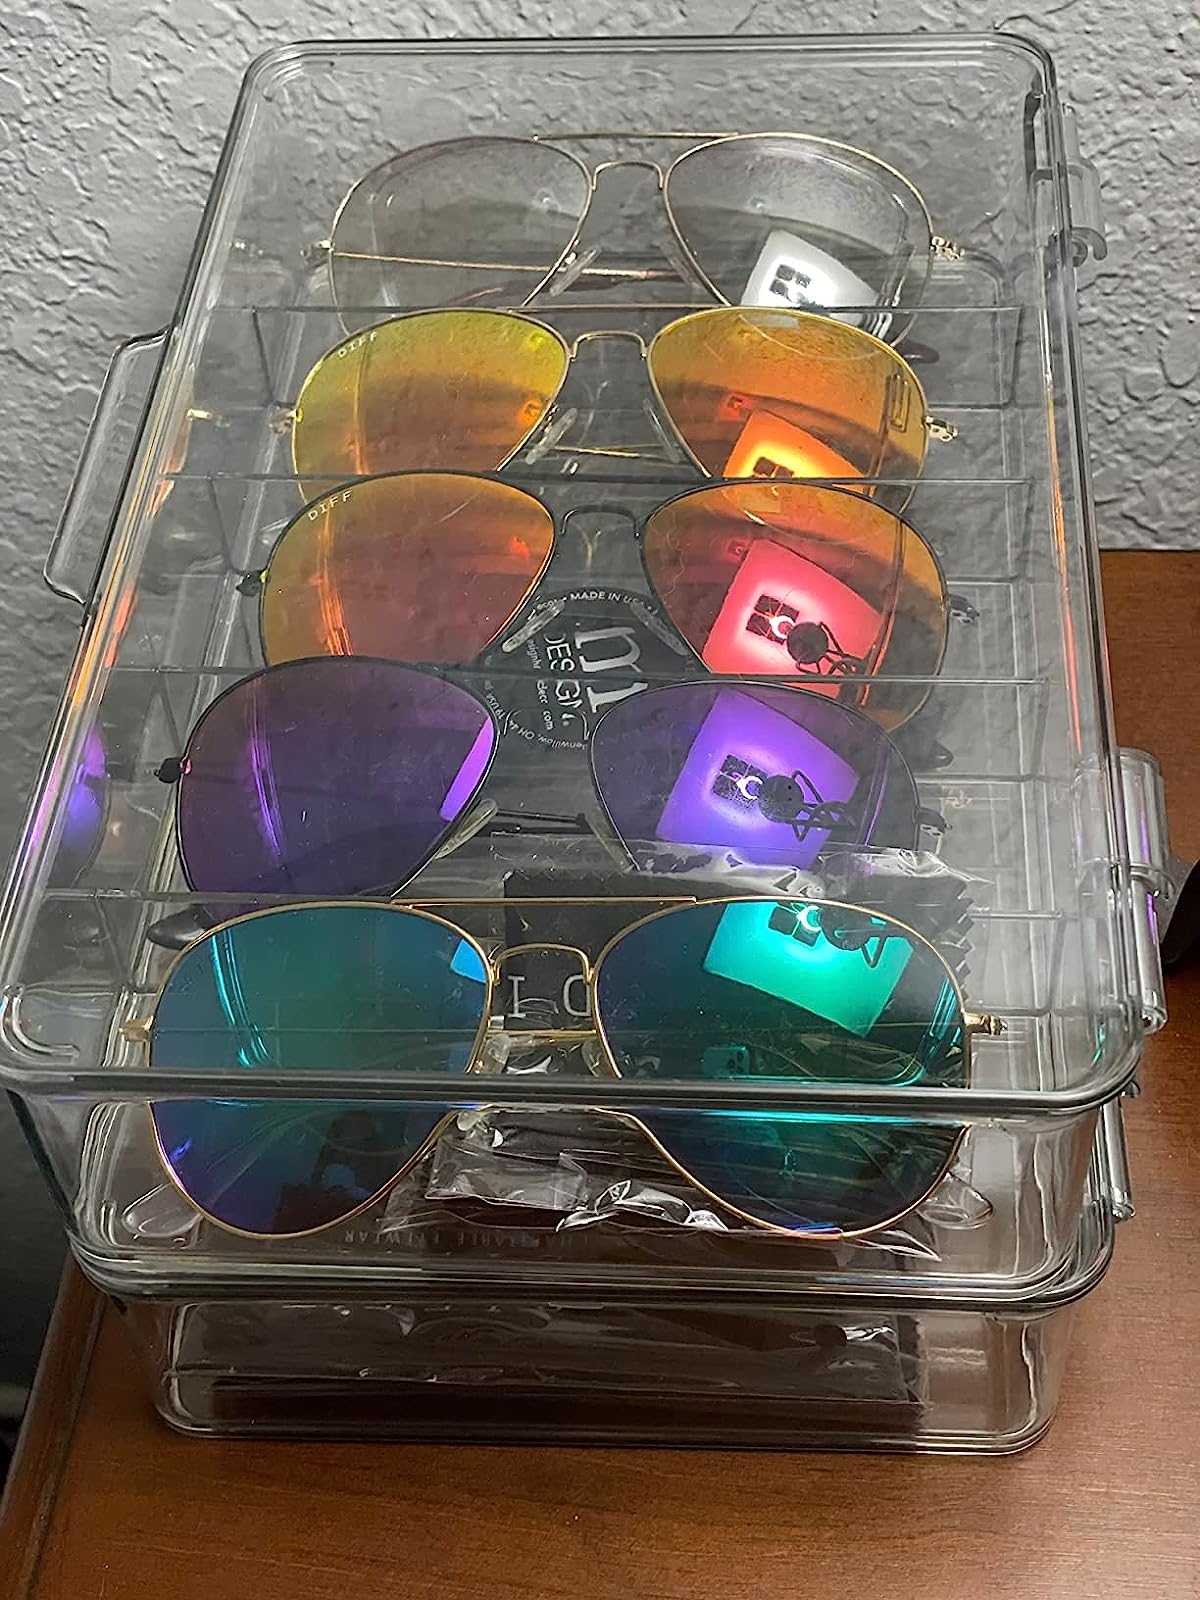 Reviewer image of their sunglasses stored in the acrylic organizer